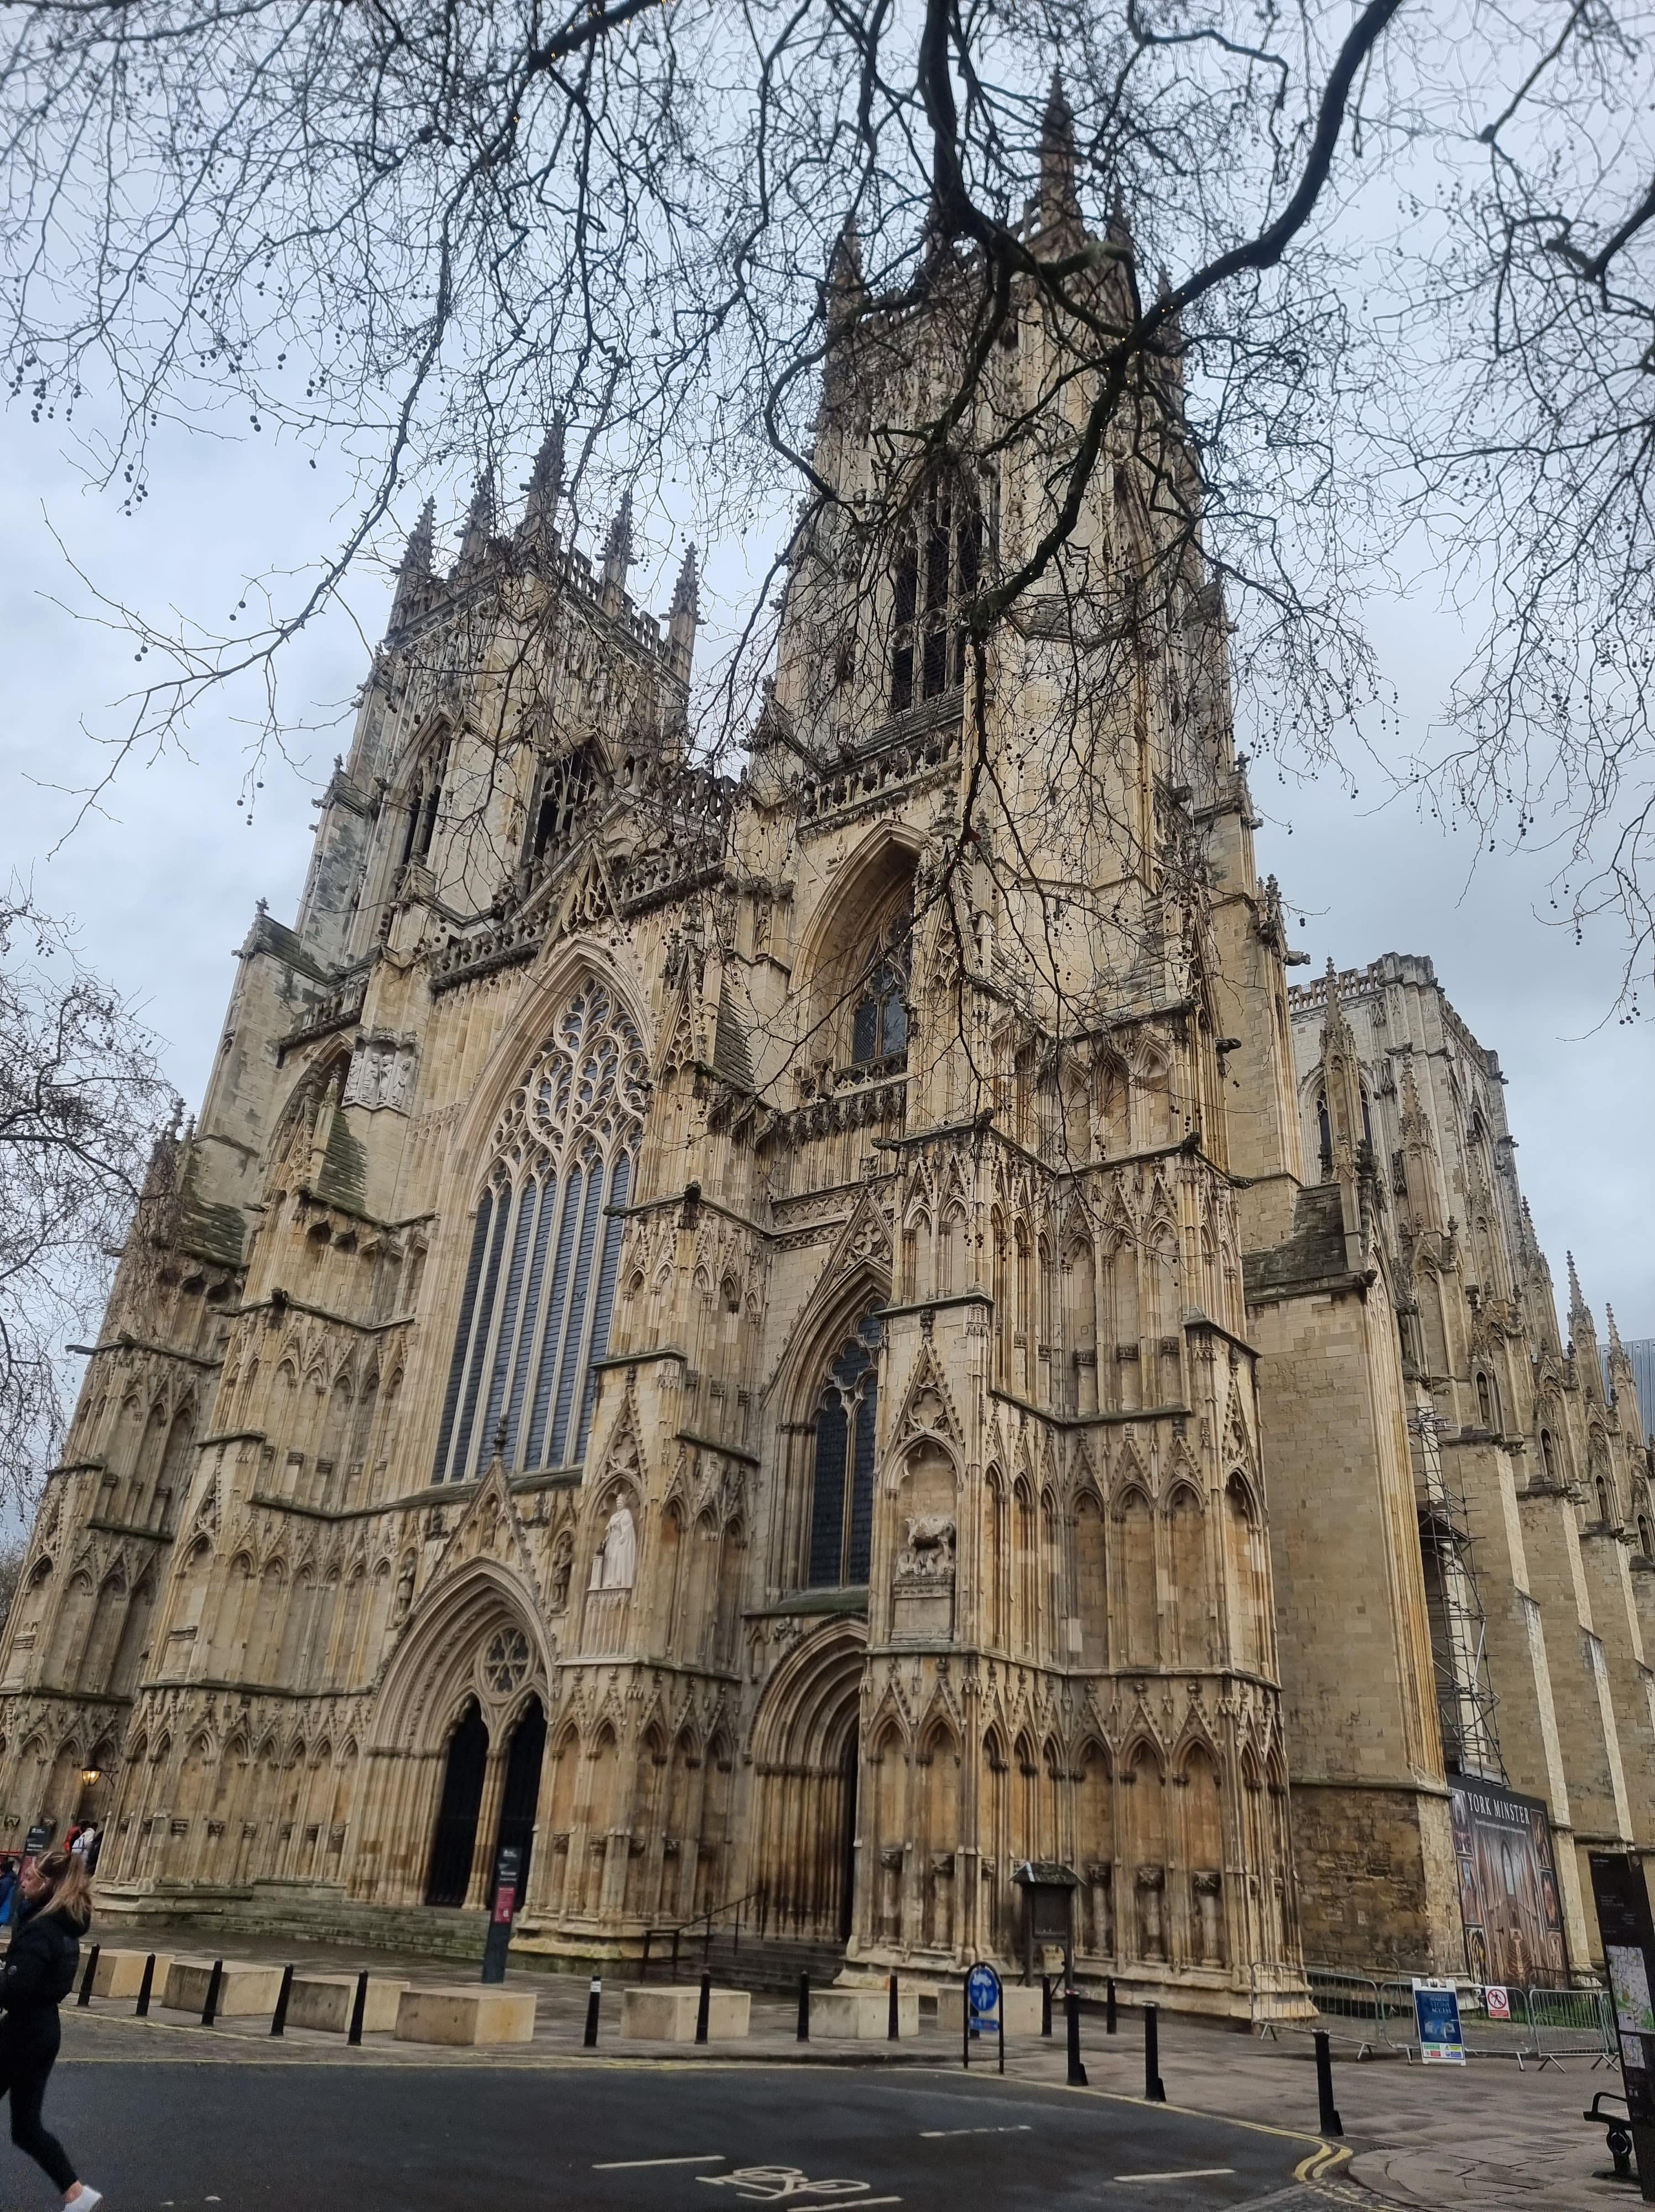 Beautiful architecture of York Minster from the outside